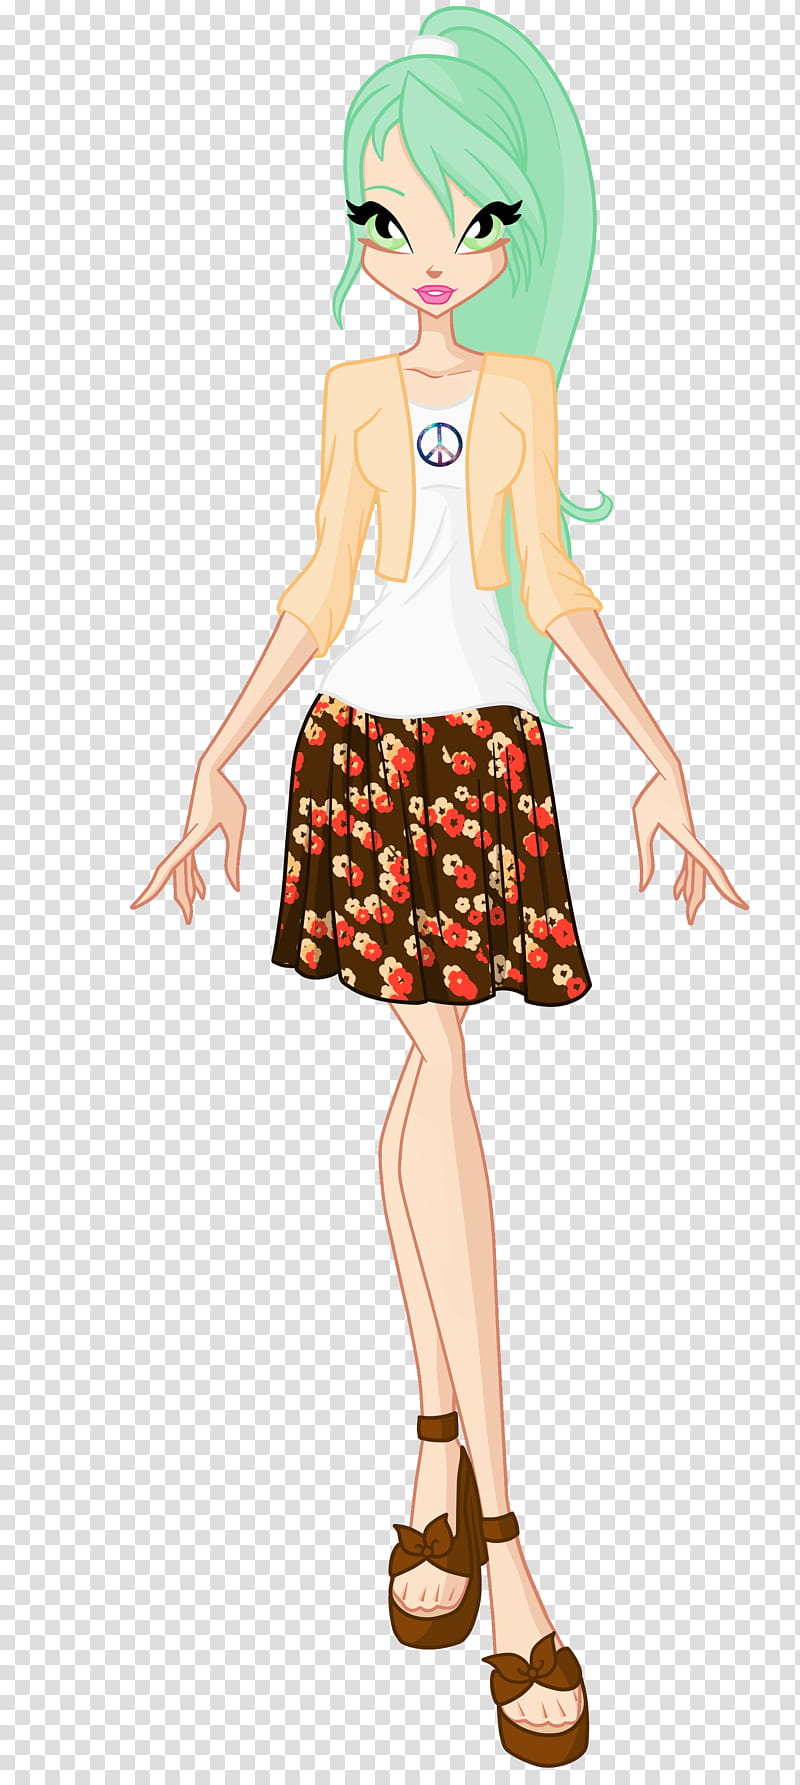 Adoptable OC Irene SOLD transparent background PNG clipart